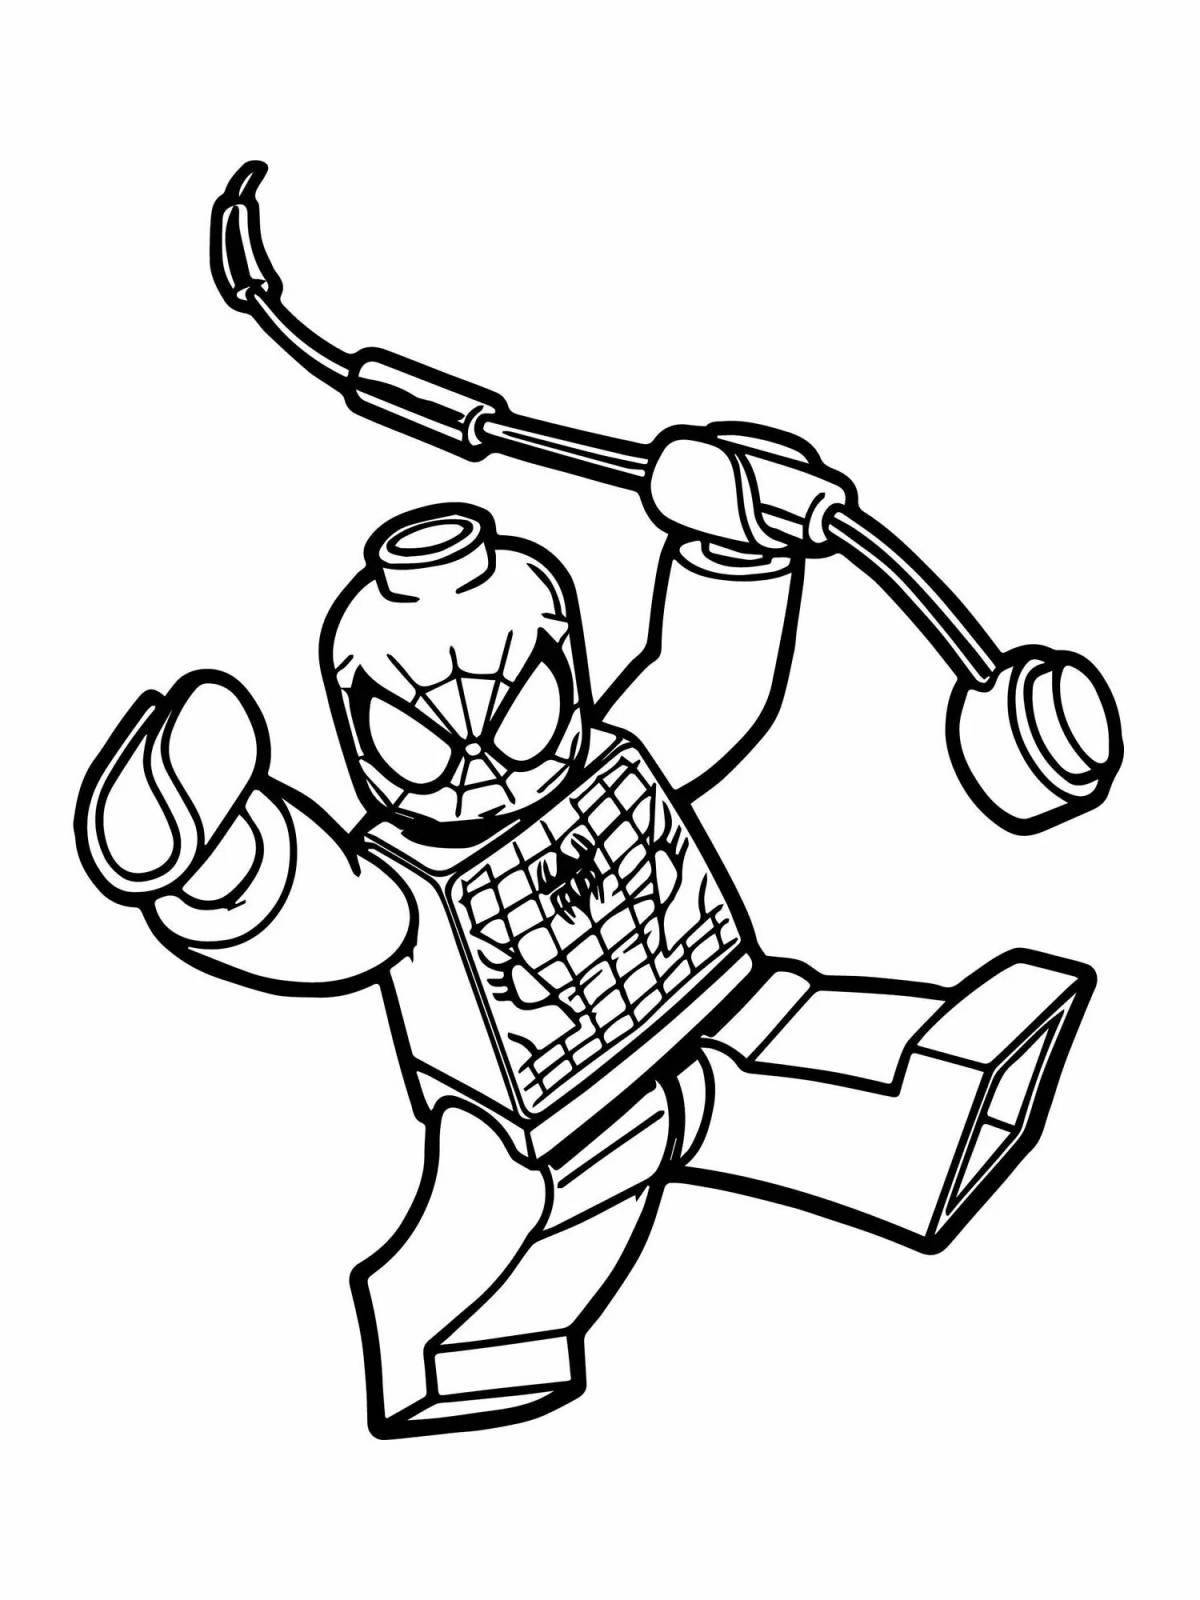 Lego heroes colorful coloring pages